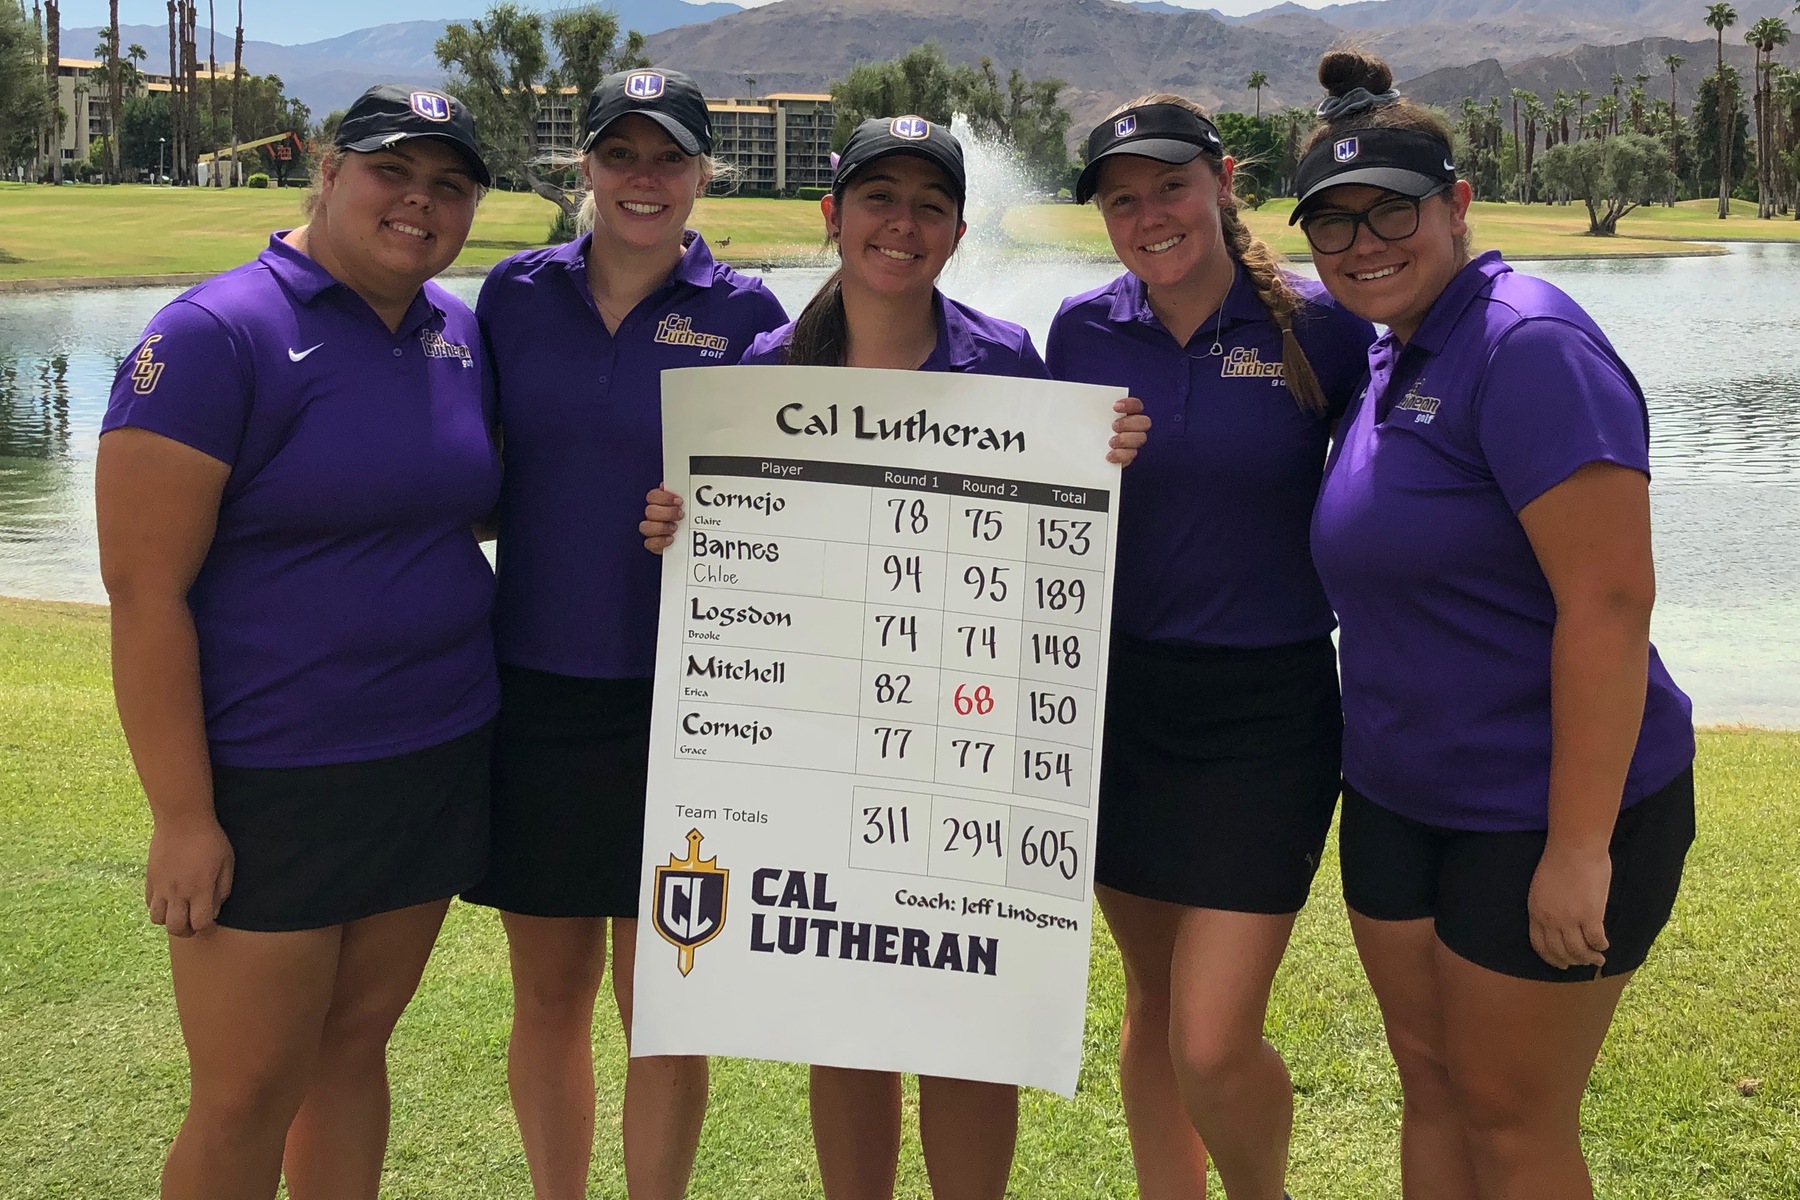 Mitchell’s 68 Sets Program Record for Lowest Round; Regals Place Fourth, Set Program Record for Lowest Round and 36-hole Score